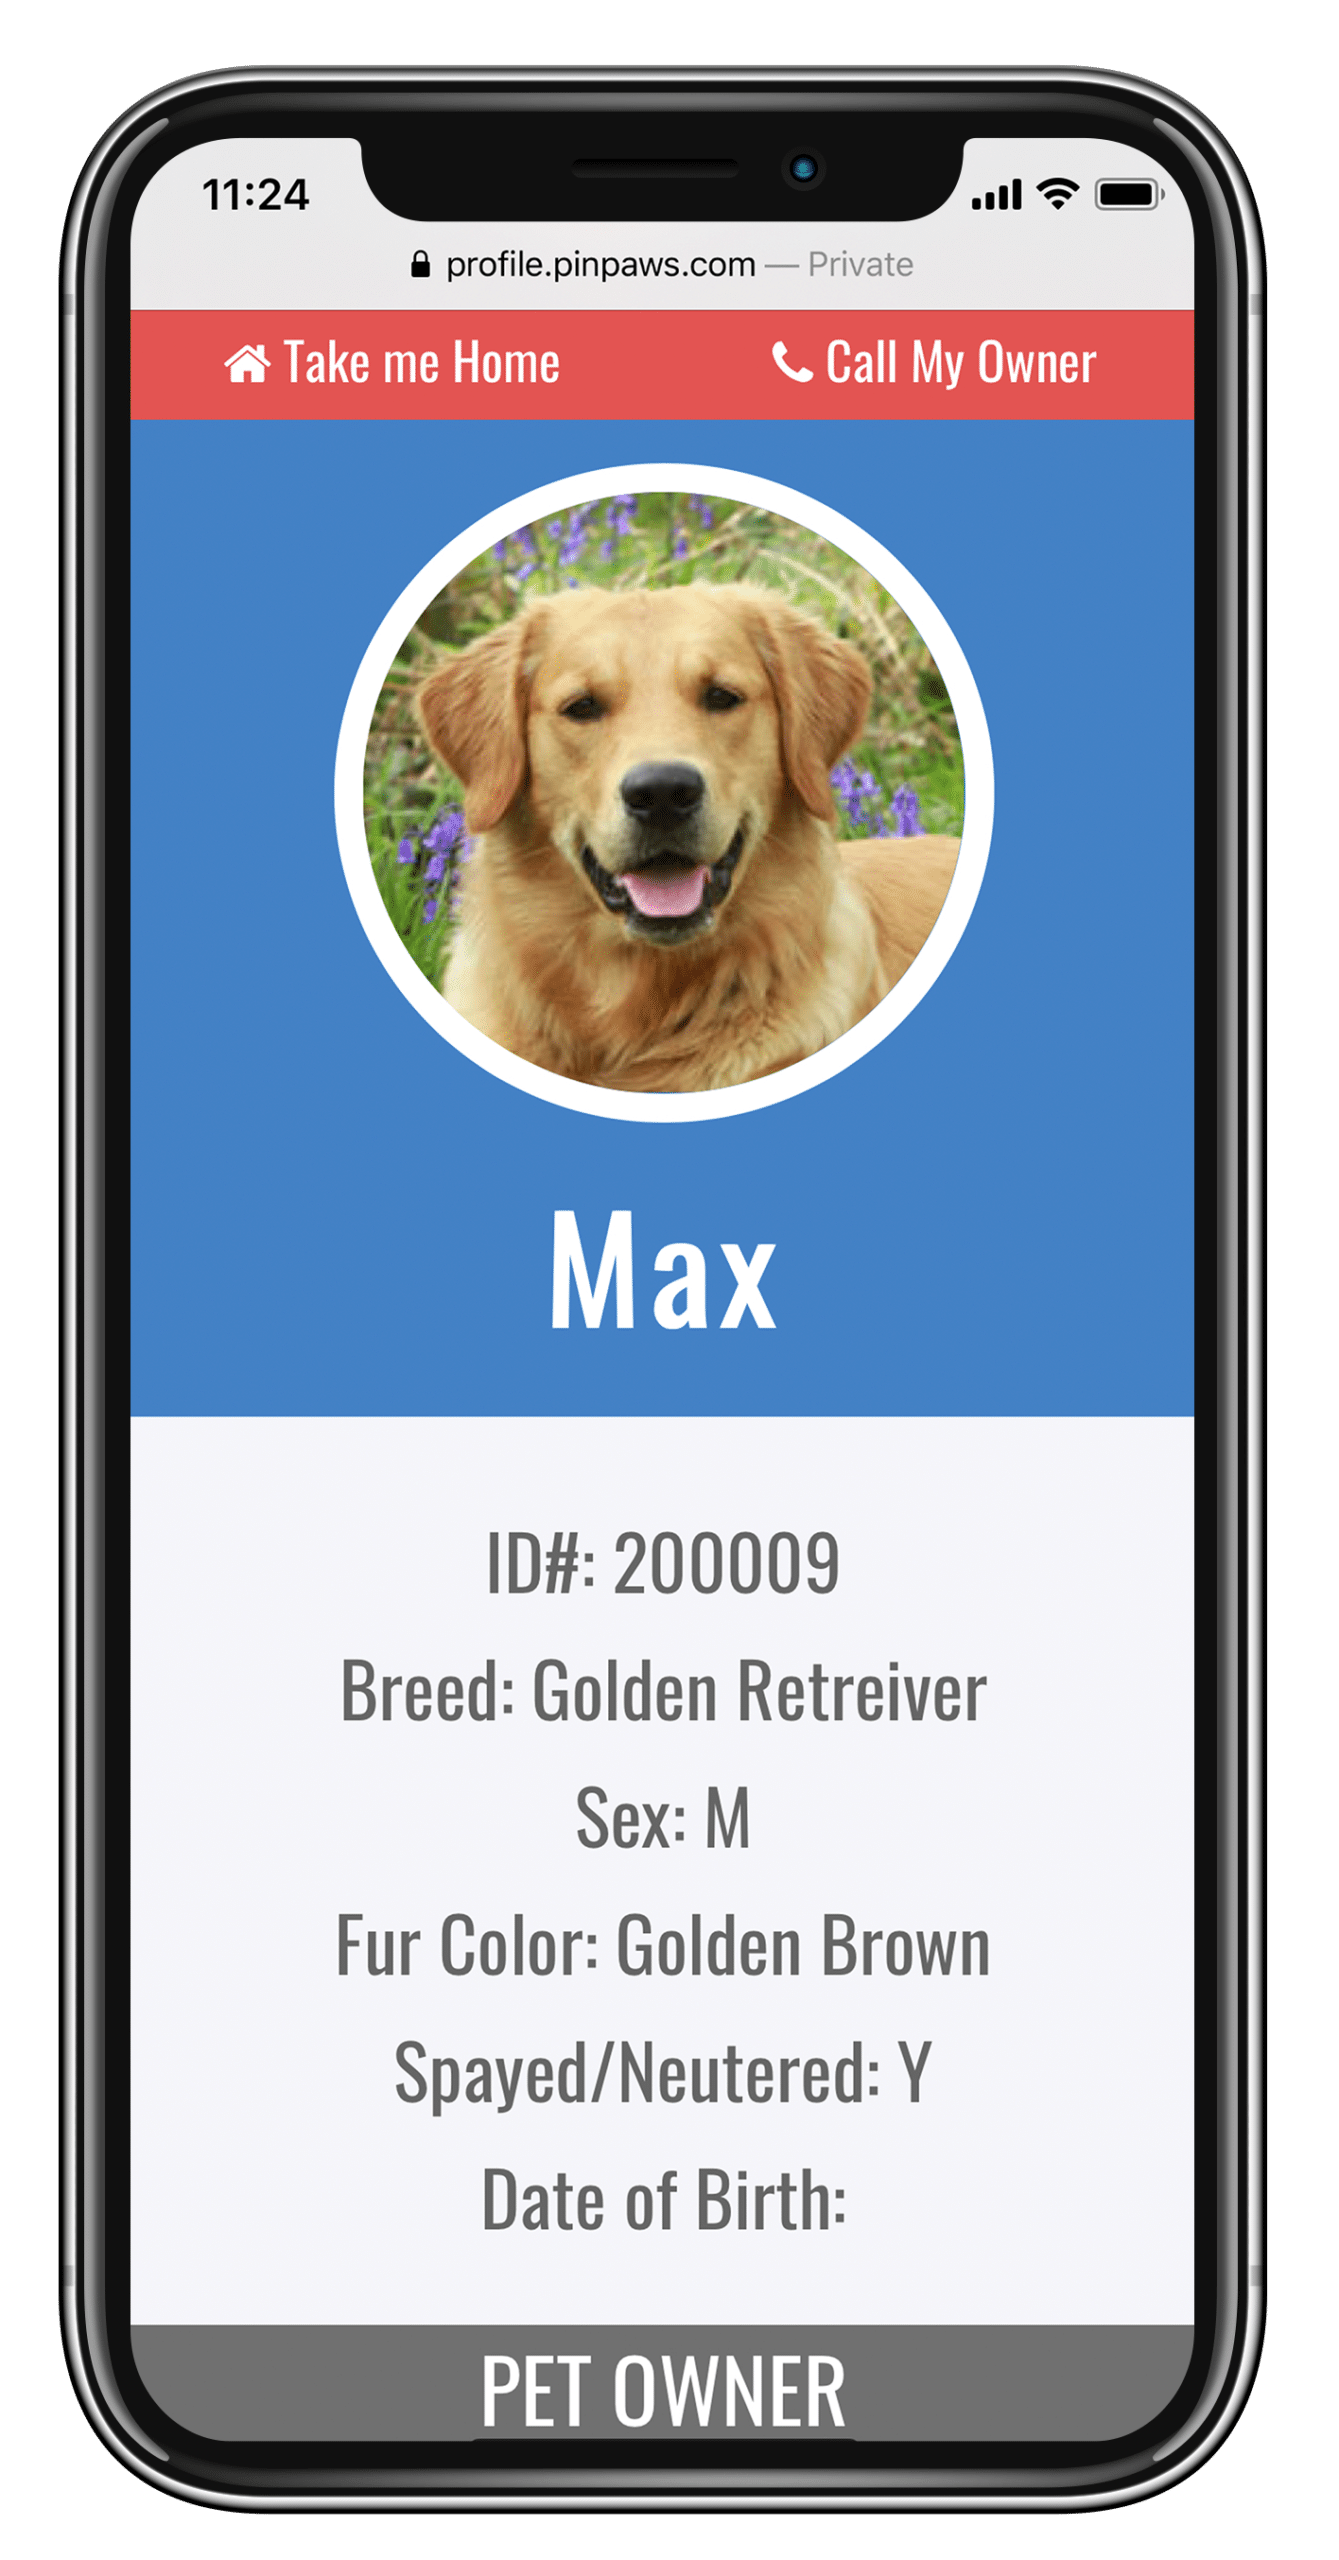 Found Pet profile pulled up on iPhone